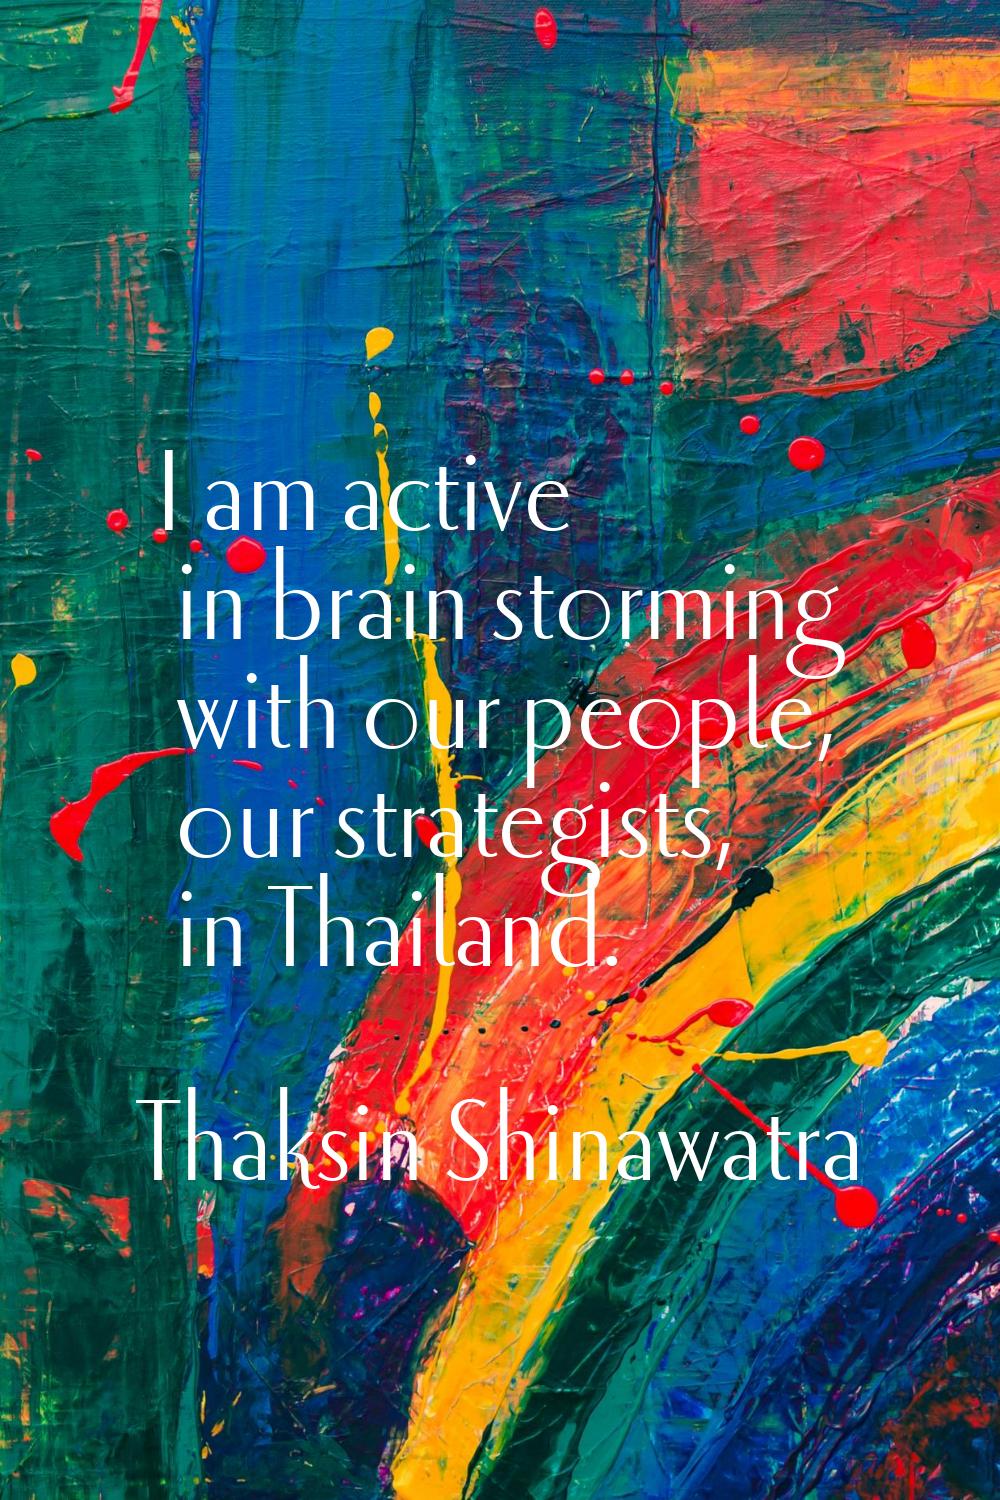 I am active in brain storming with our people, our strategists, in Thailand.